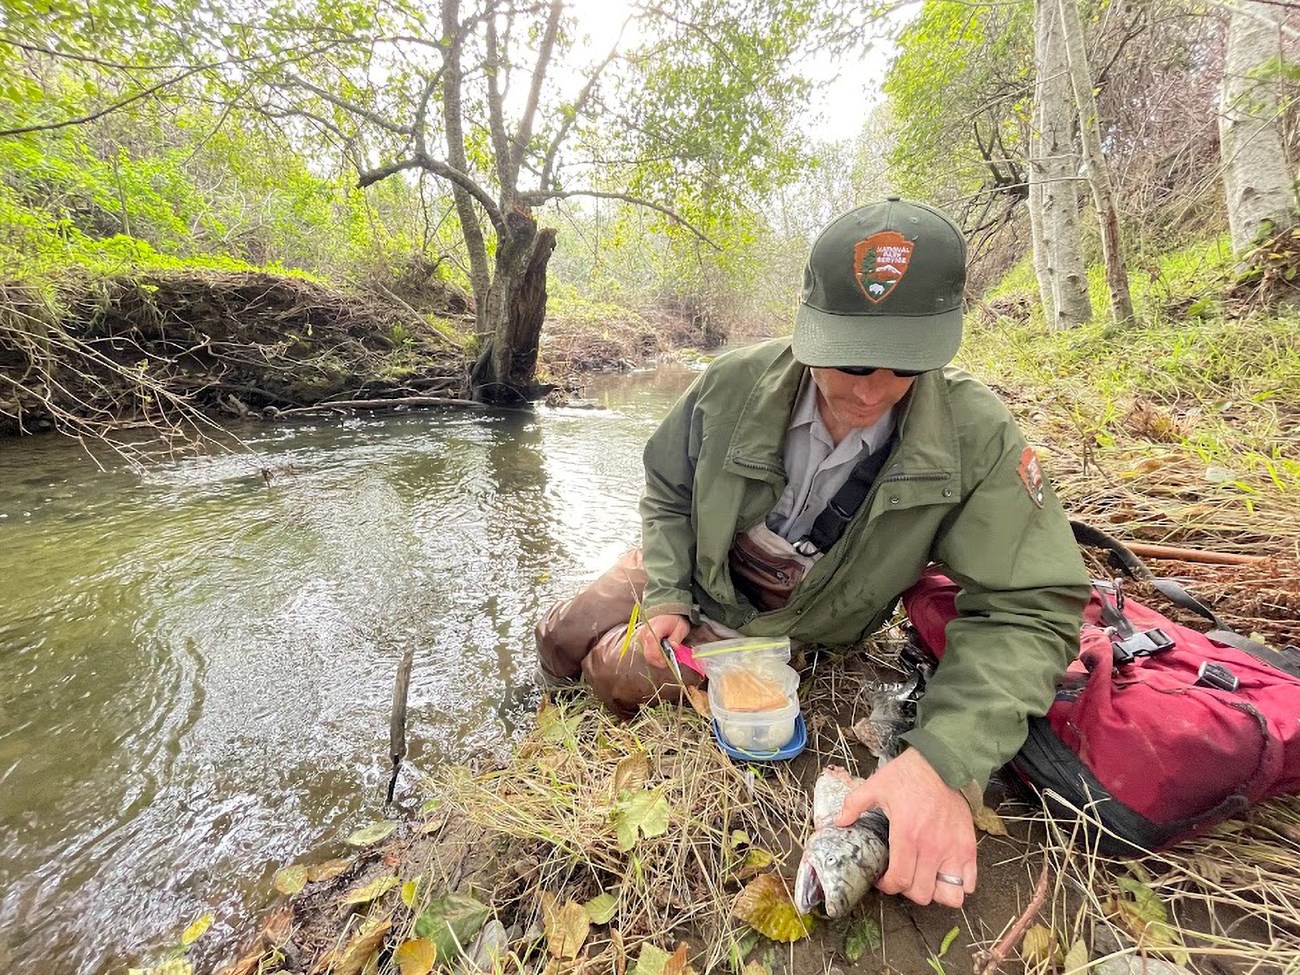 A man wearing an NPS uniform and sunglasses collects a tissue sample from a dead fish next to a creek.